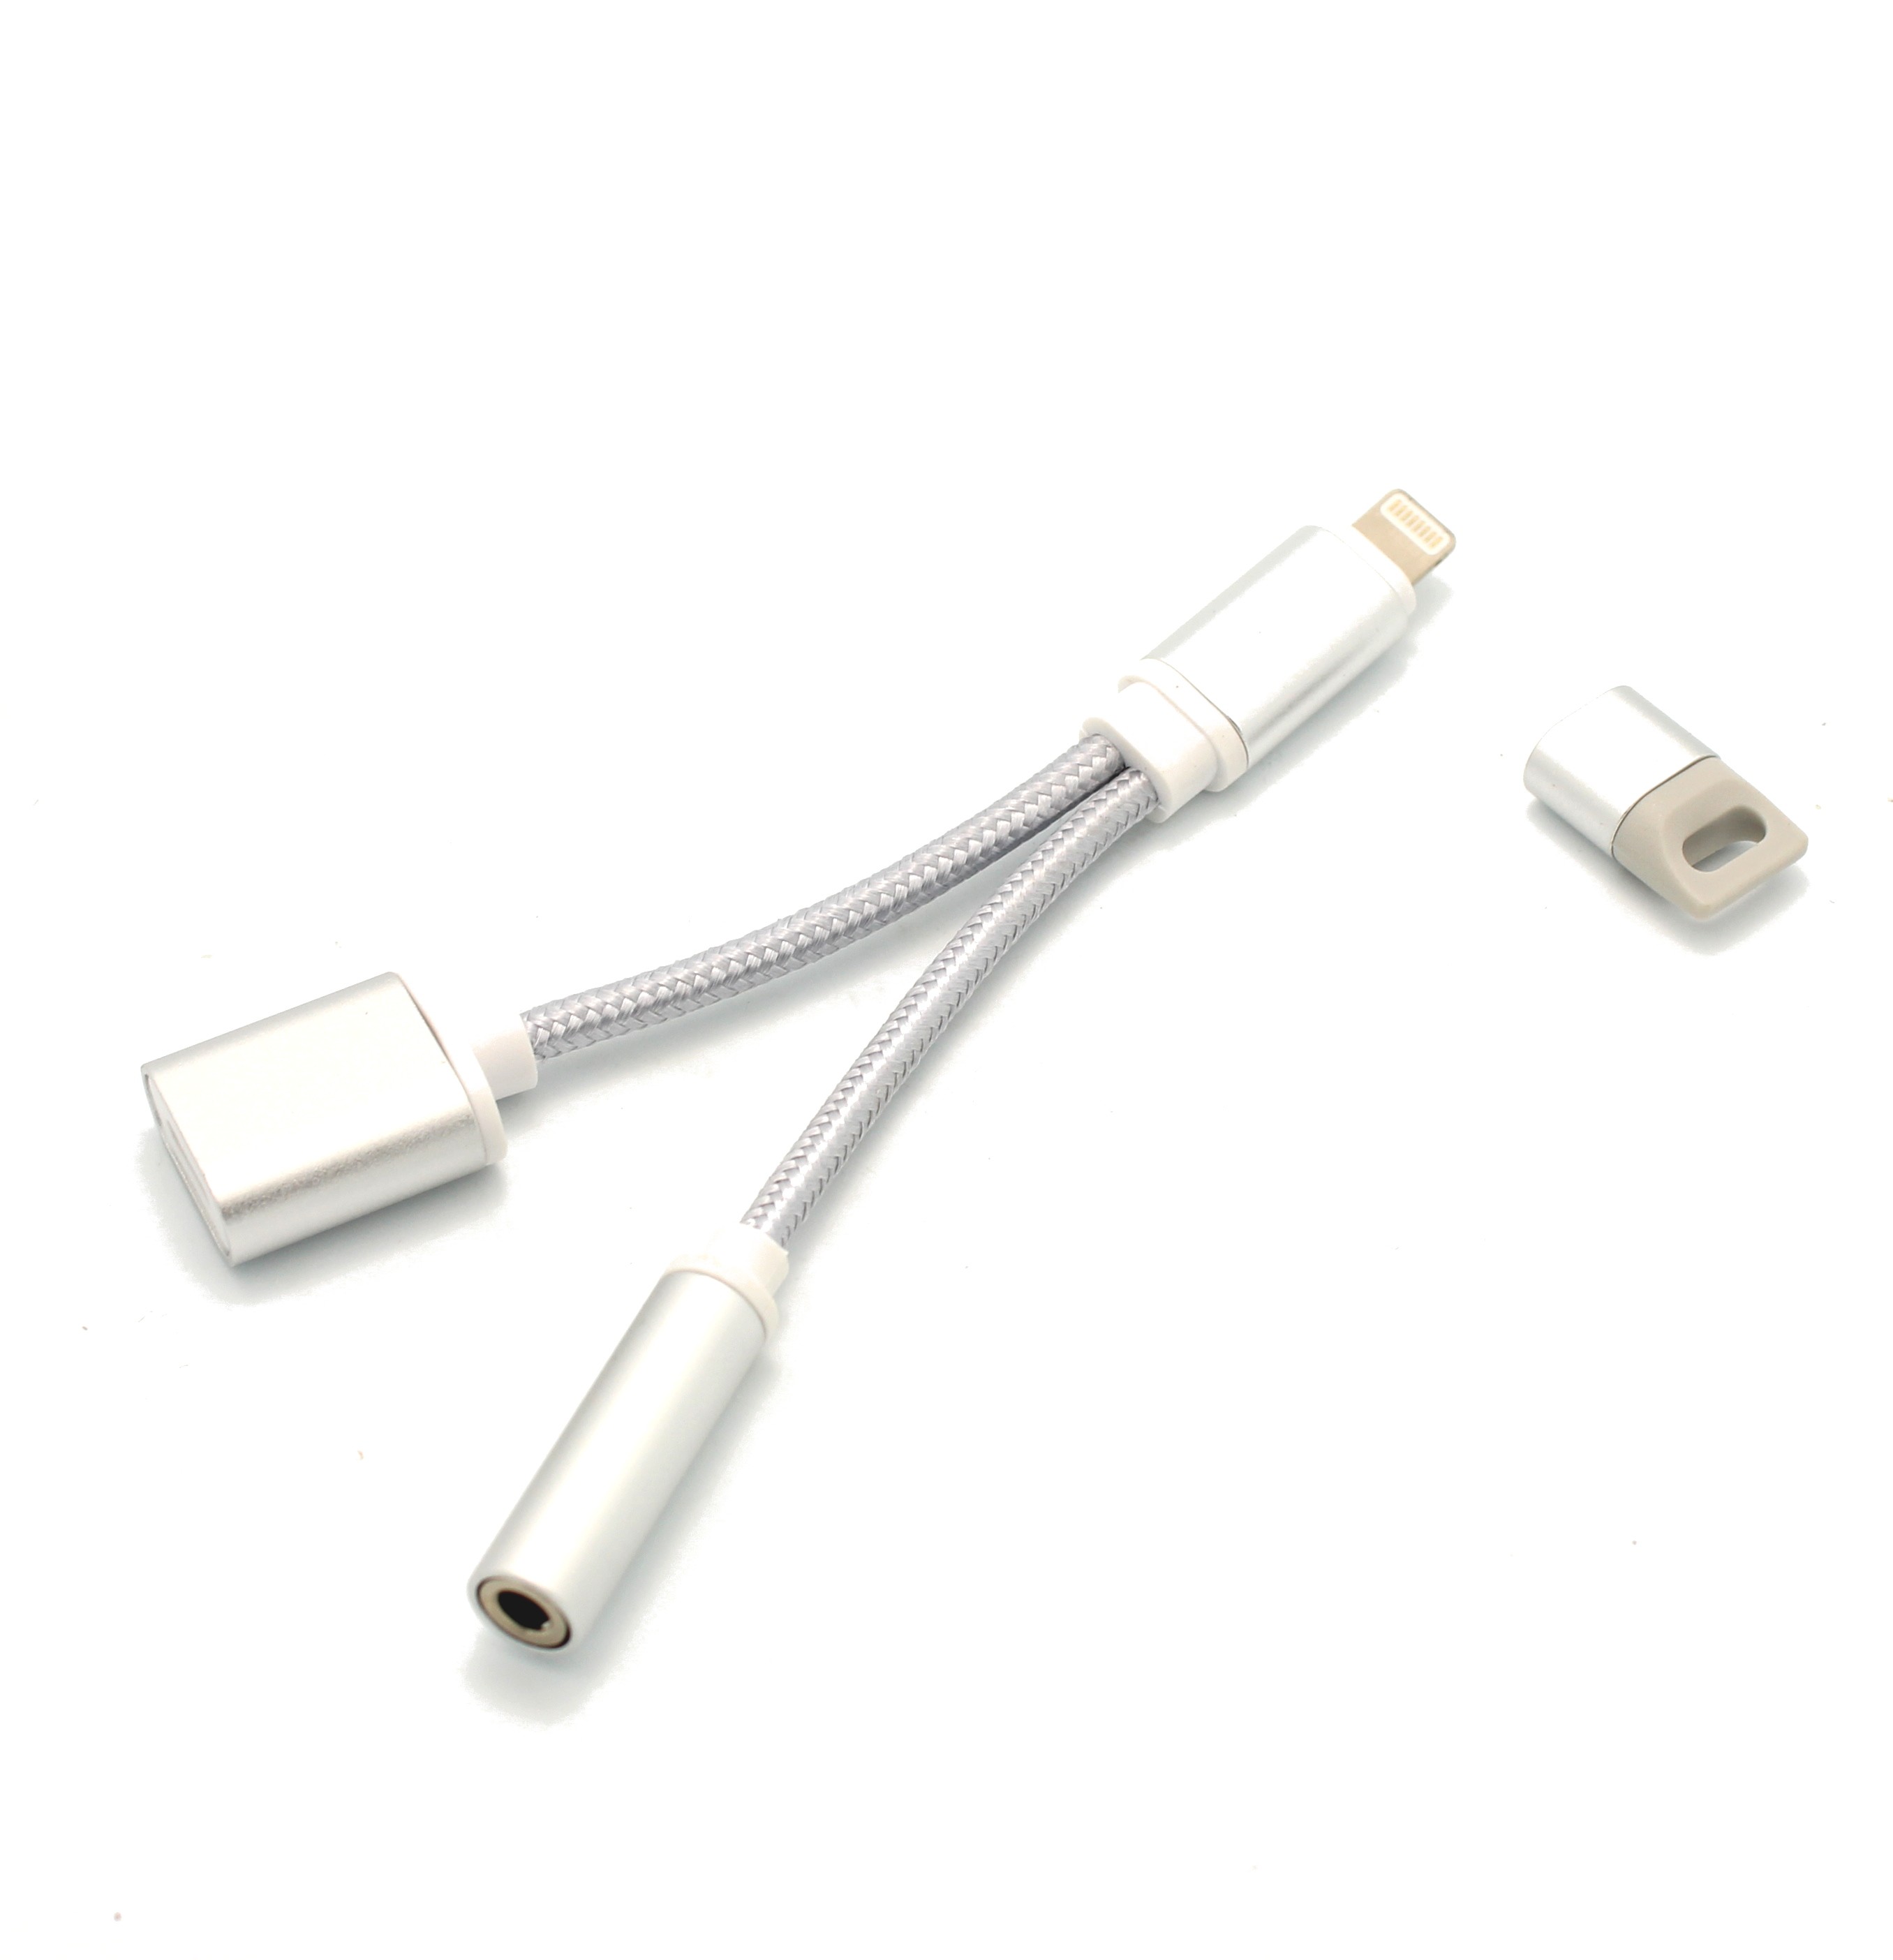 Bijlage Petulance Verdwijnen $15.99 - 2 in 1 Lightning to Headphone Adapter Cable for iPhone -  Tinkersphere